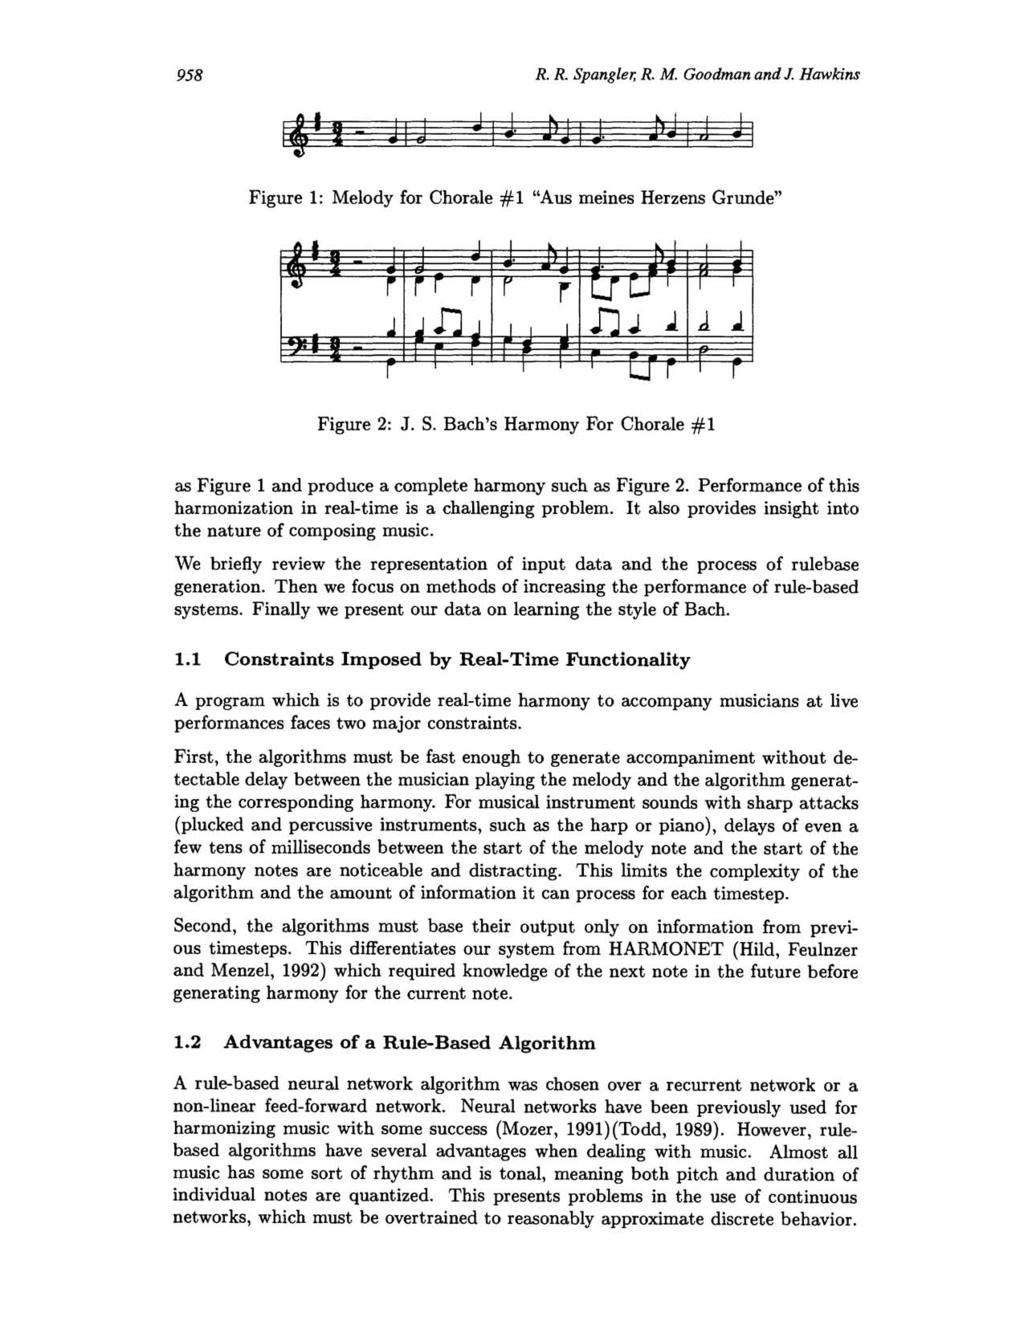 958 R. R. Spangler; R. M. Goodman and J Hawkins I~II- JIJ Figure 1: Melody for Chorale #1 "Aus meines Herzens Grunde" Figure 2: J. S. Bach's Harmony For Chorale #1 as Figure 1 and produce a complete harmony such as Figure 2.